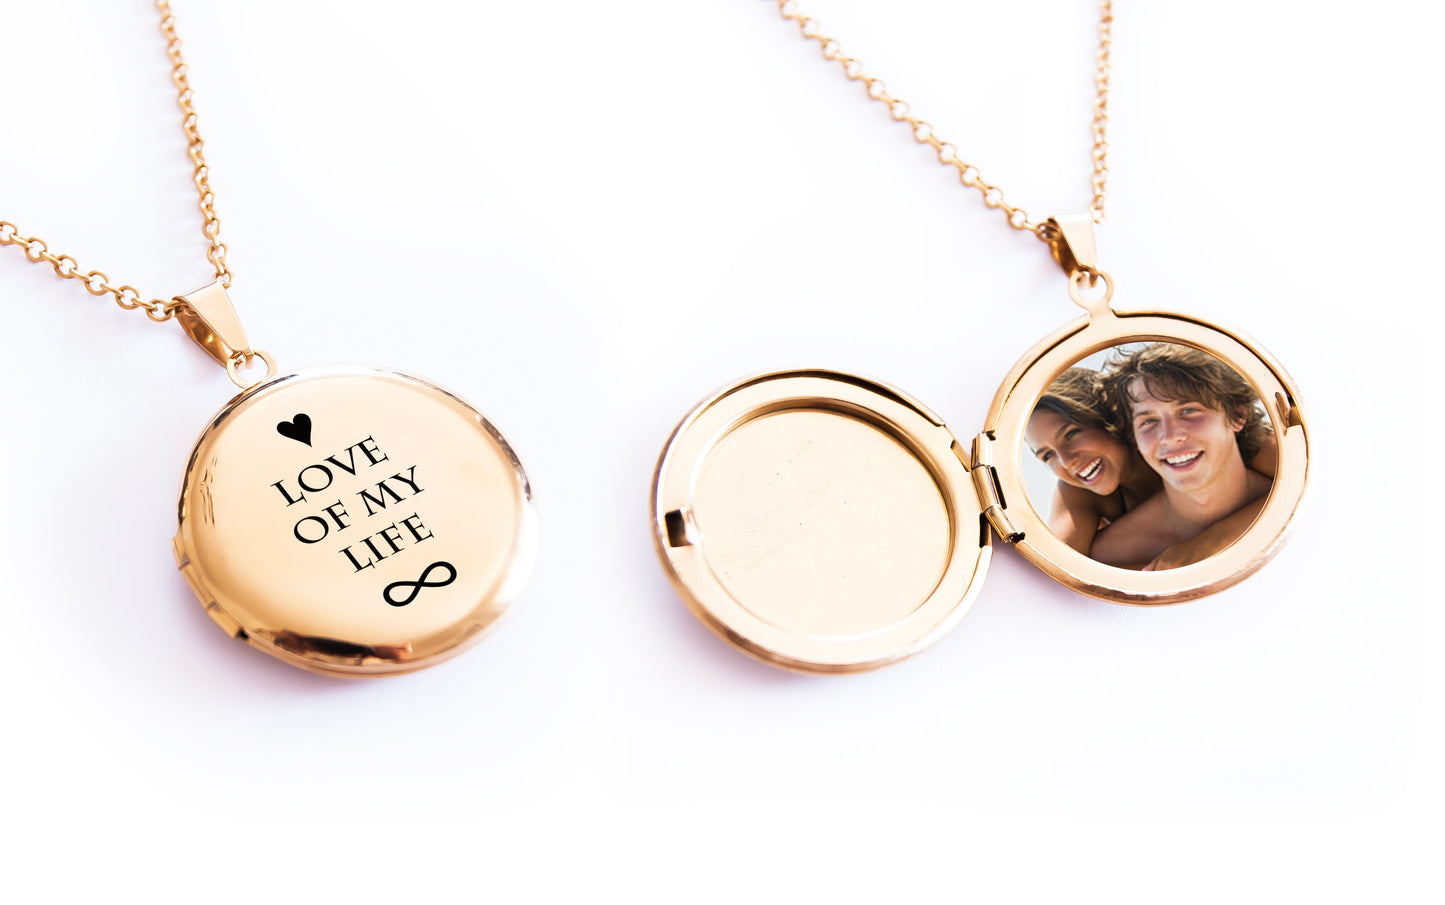 Personalized Locket Necklace with Photo - Unique Gift for Girlfriend or Wife